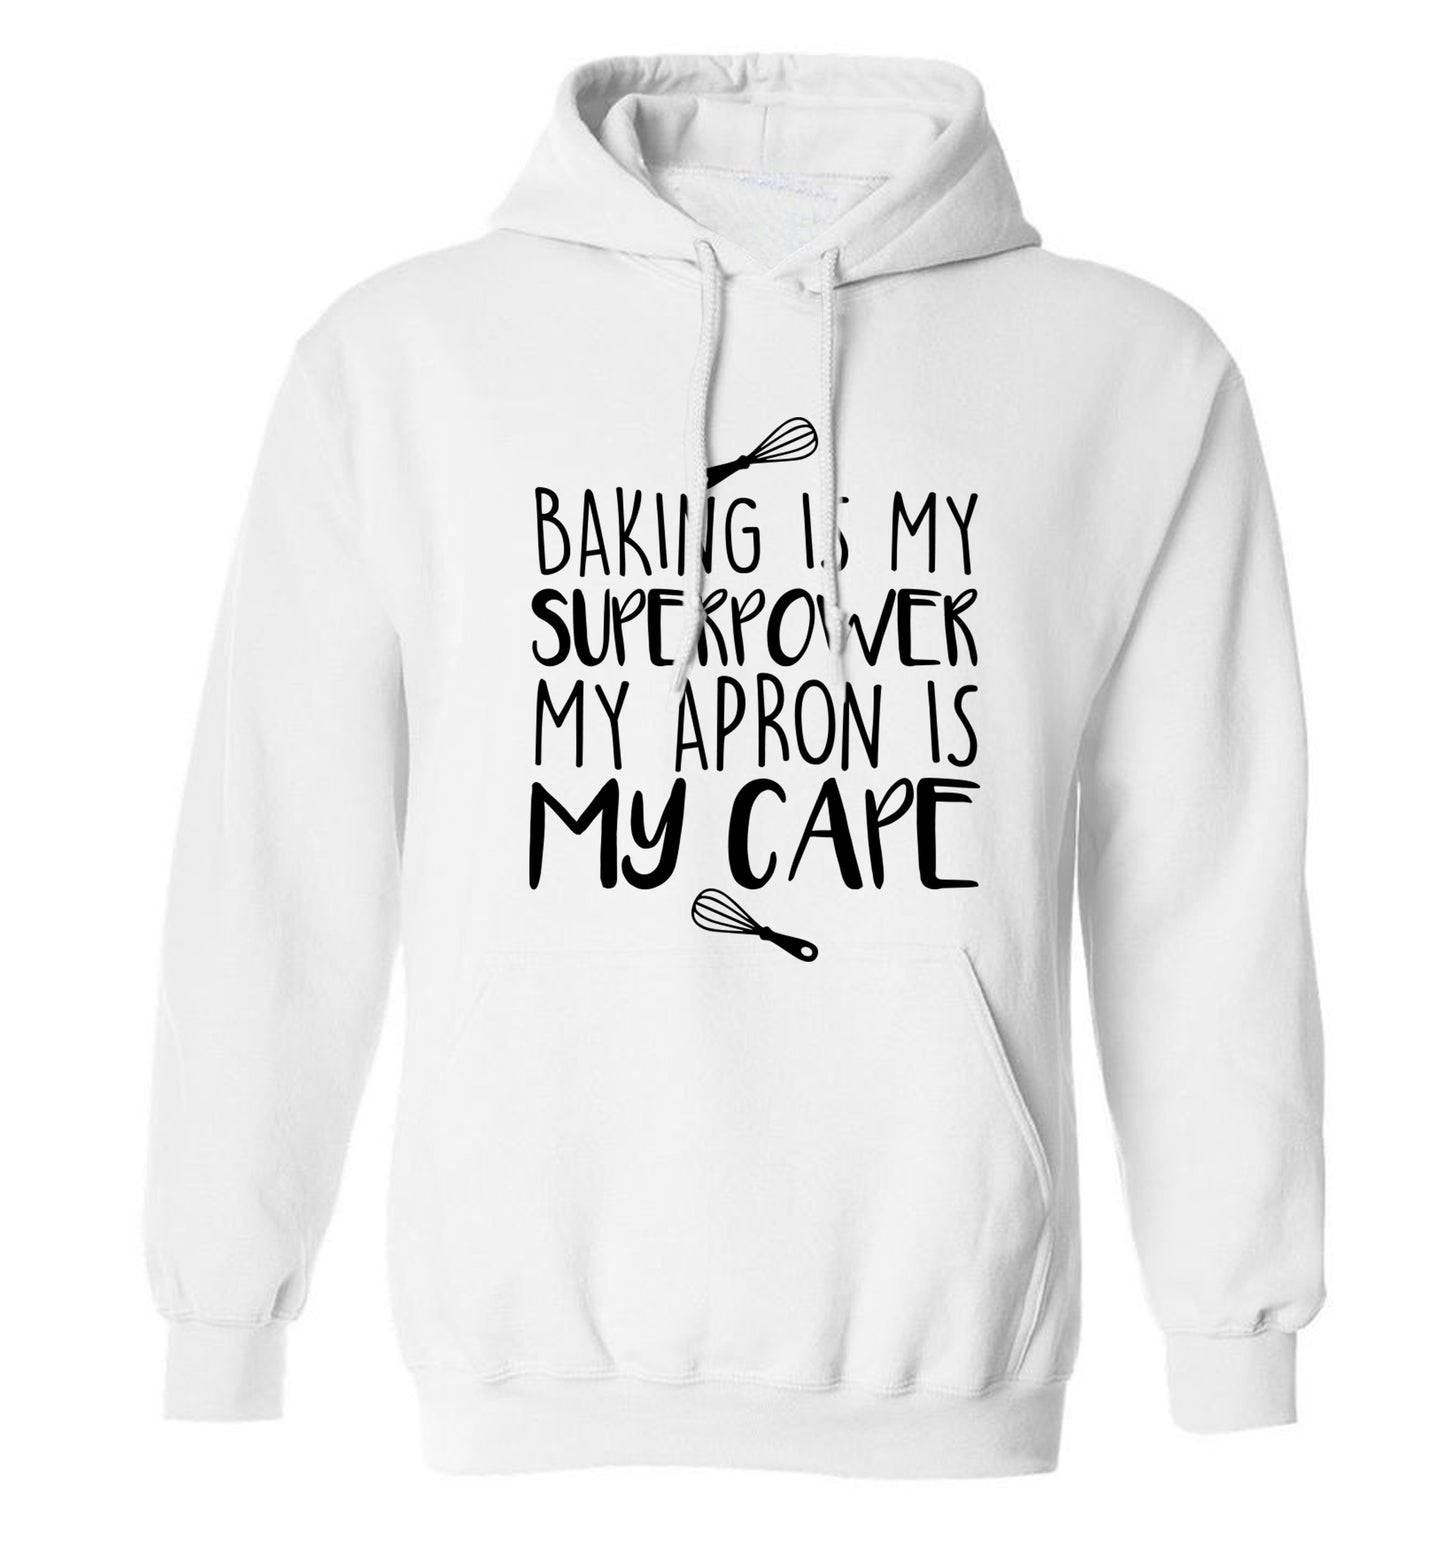 Baking is my superpower my apron is my cape adults unisex white hoodie 2XL